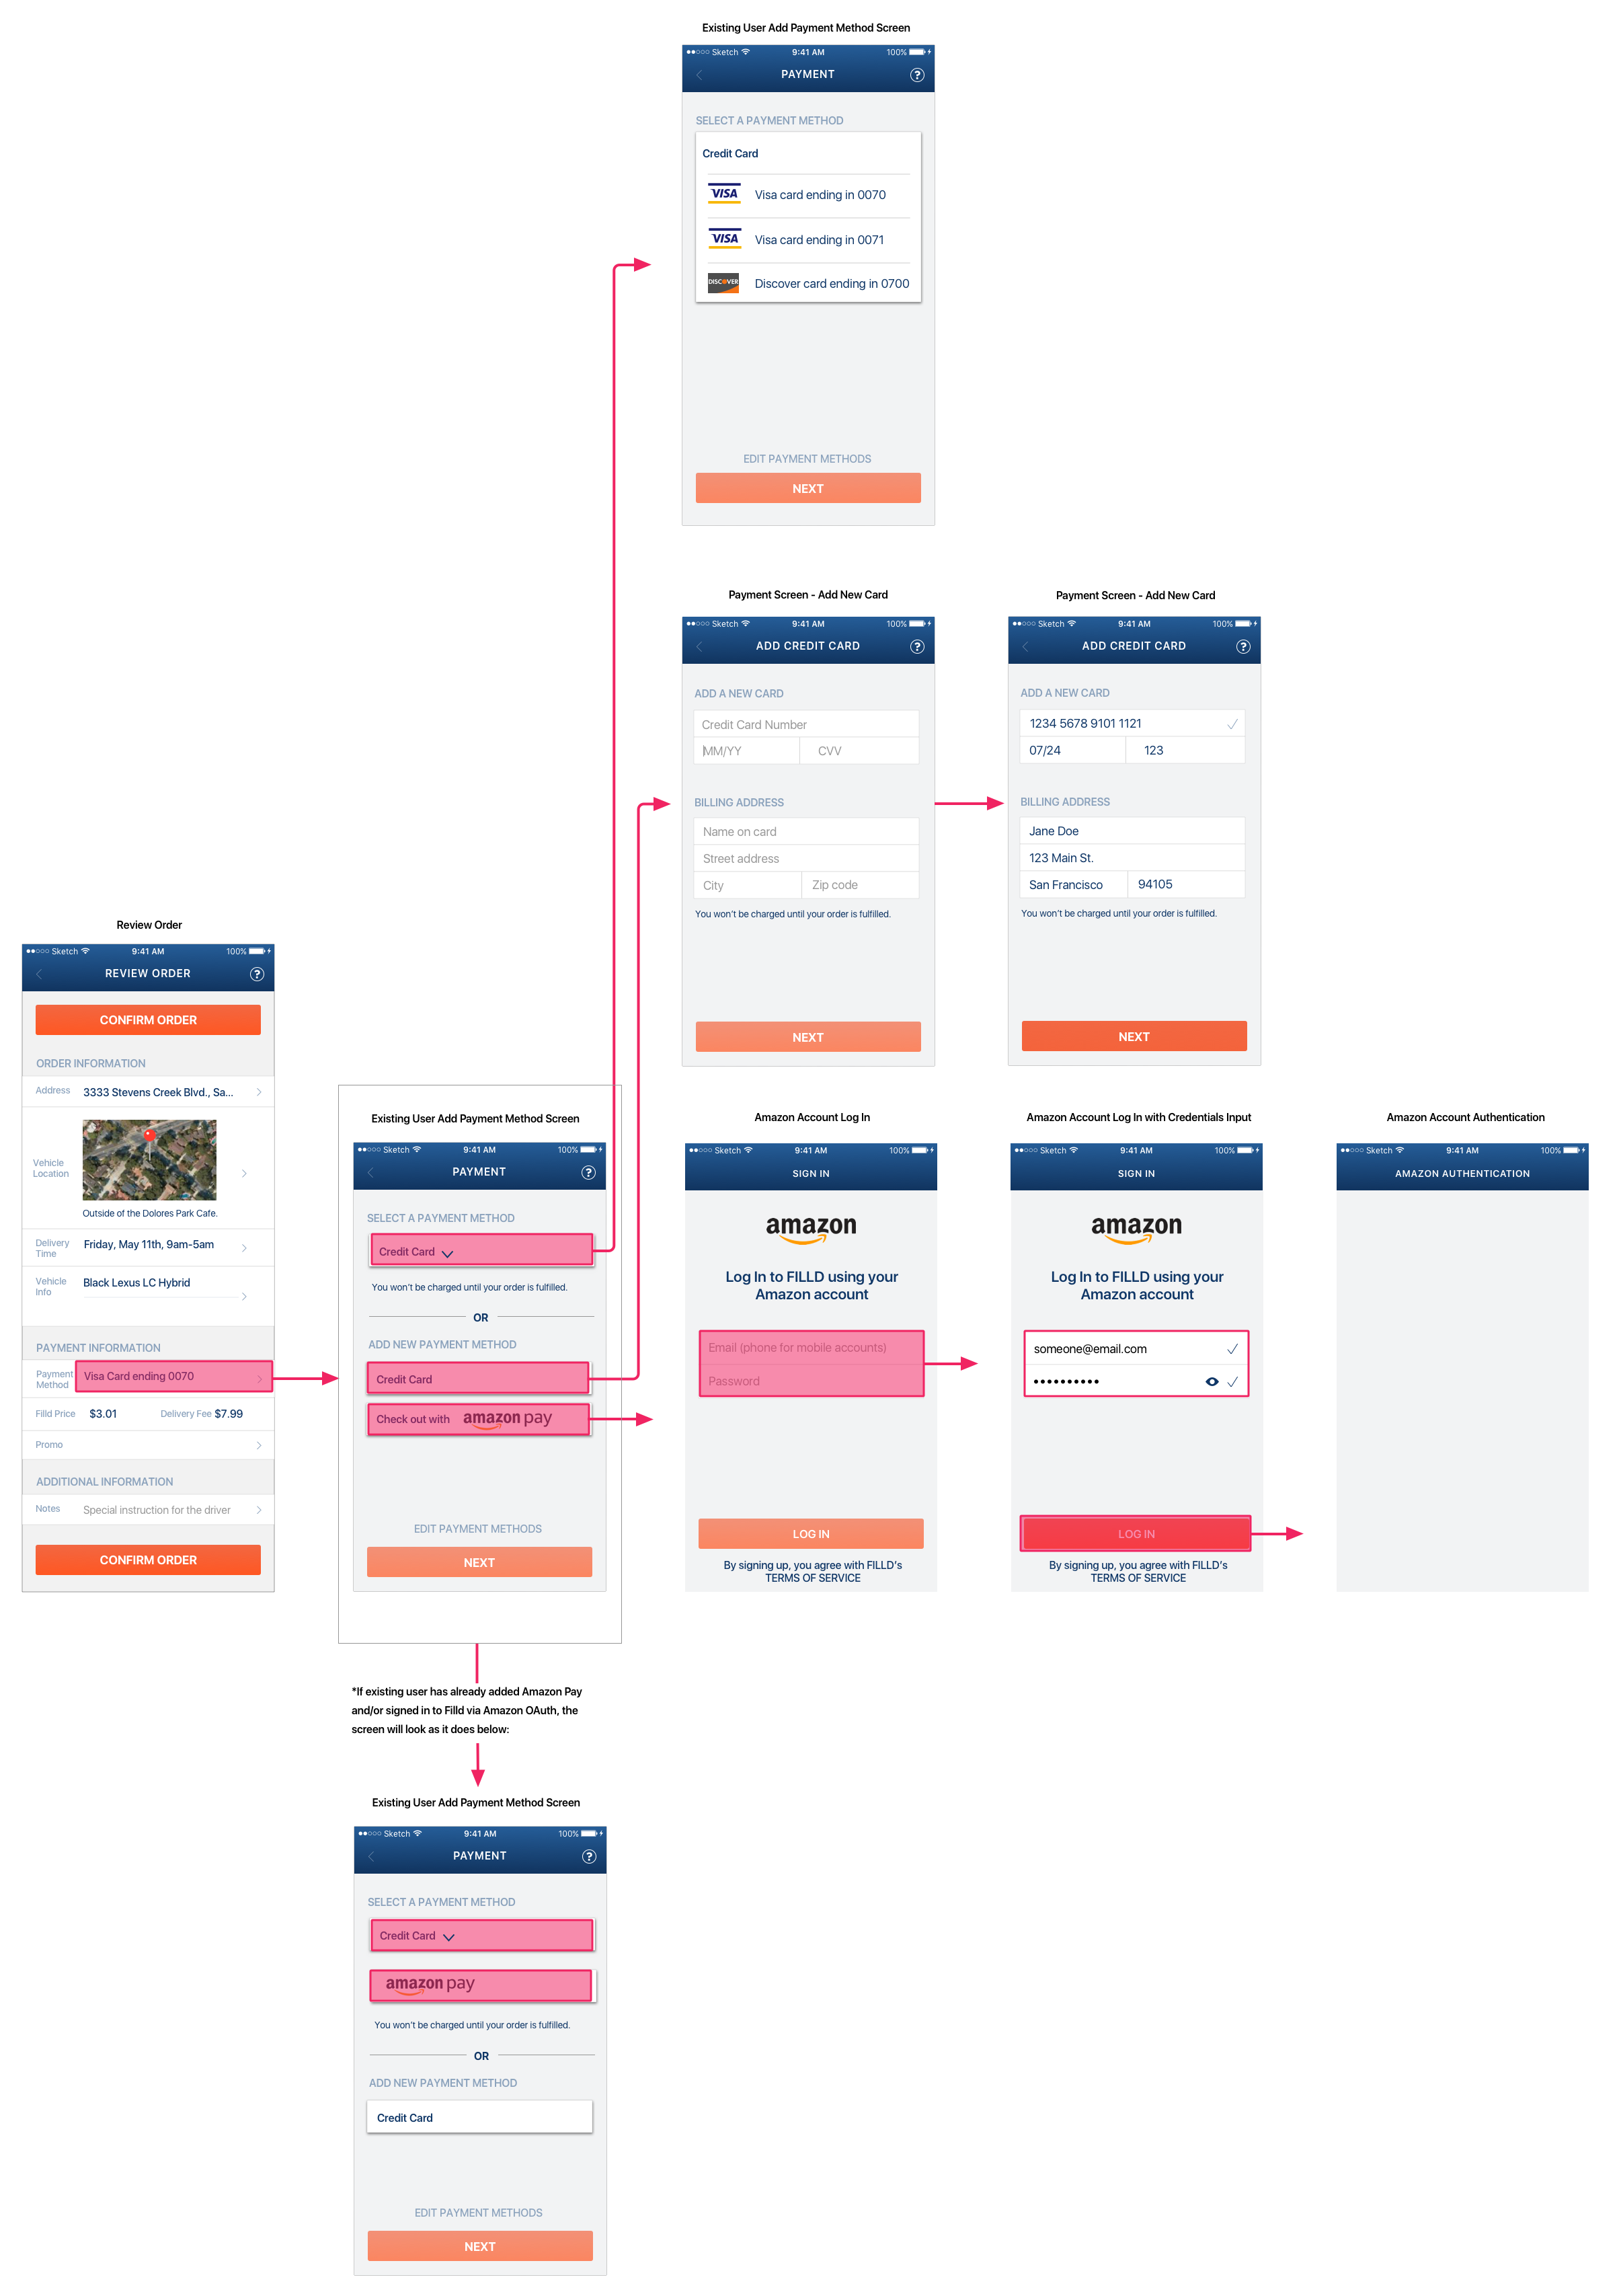 This shows a total of 9 app screens that comprised the changes to user flow for existing users with Amazon OAuth incorporated into the app.